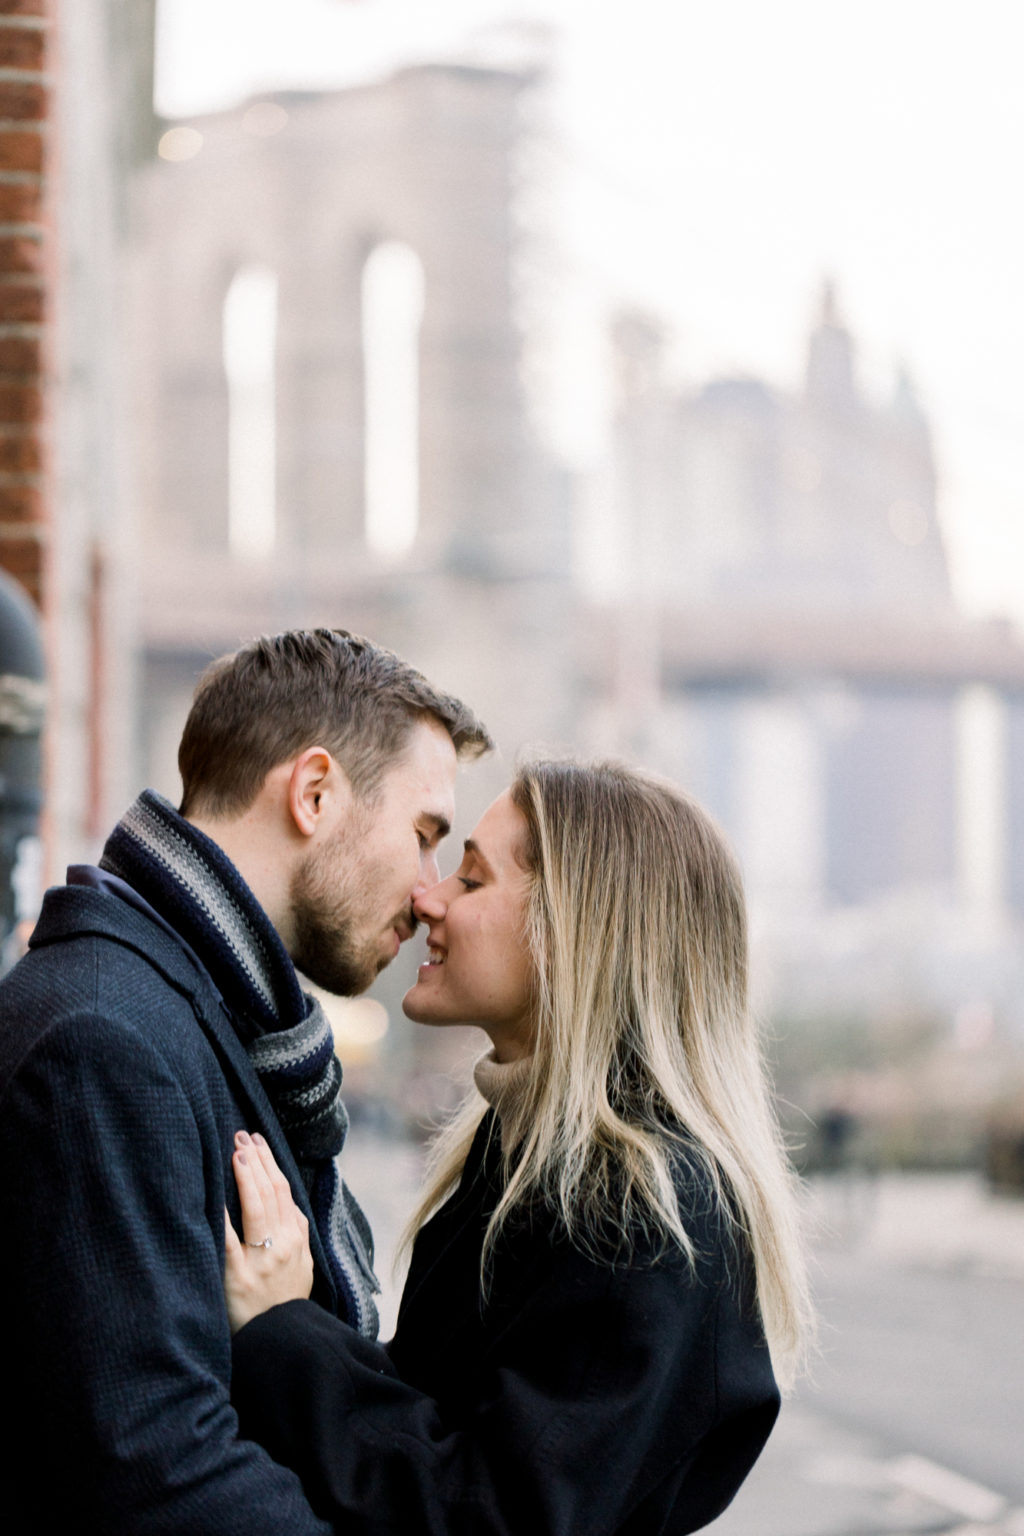 Dumbo Proposal in Winter with NYC Skyline and Brooklyn Bridge Views